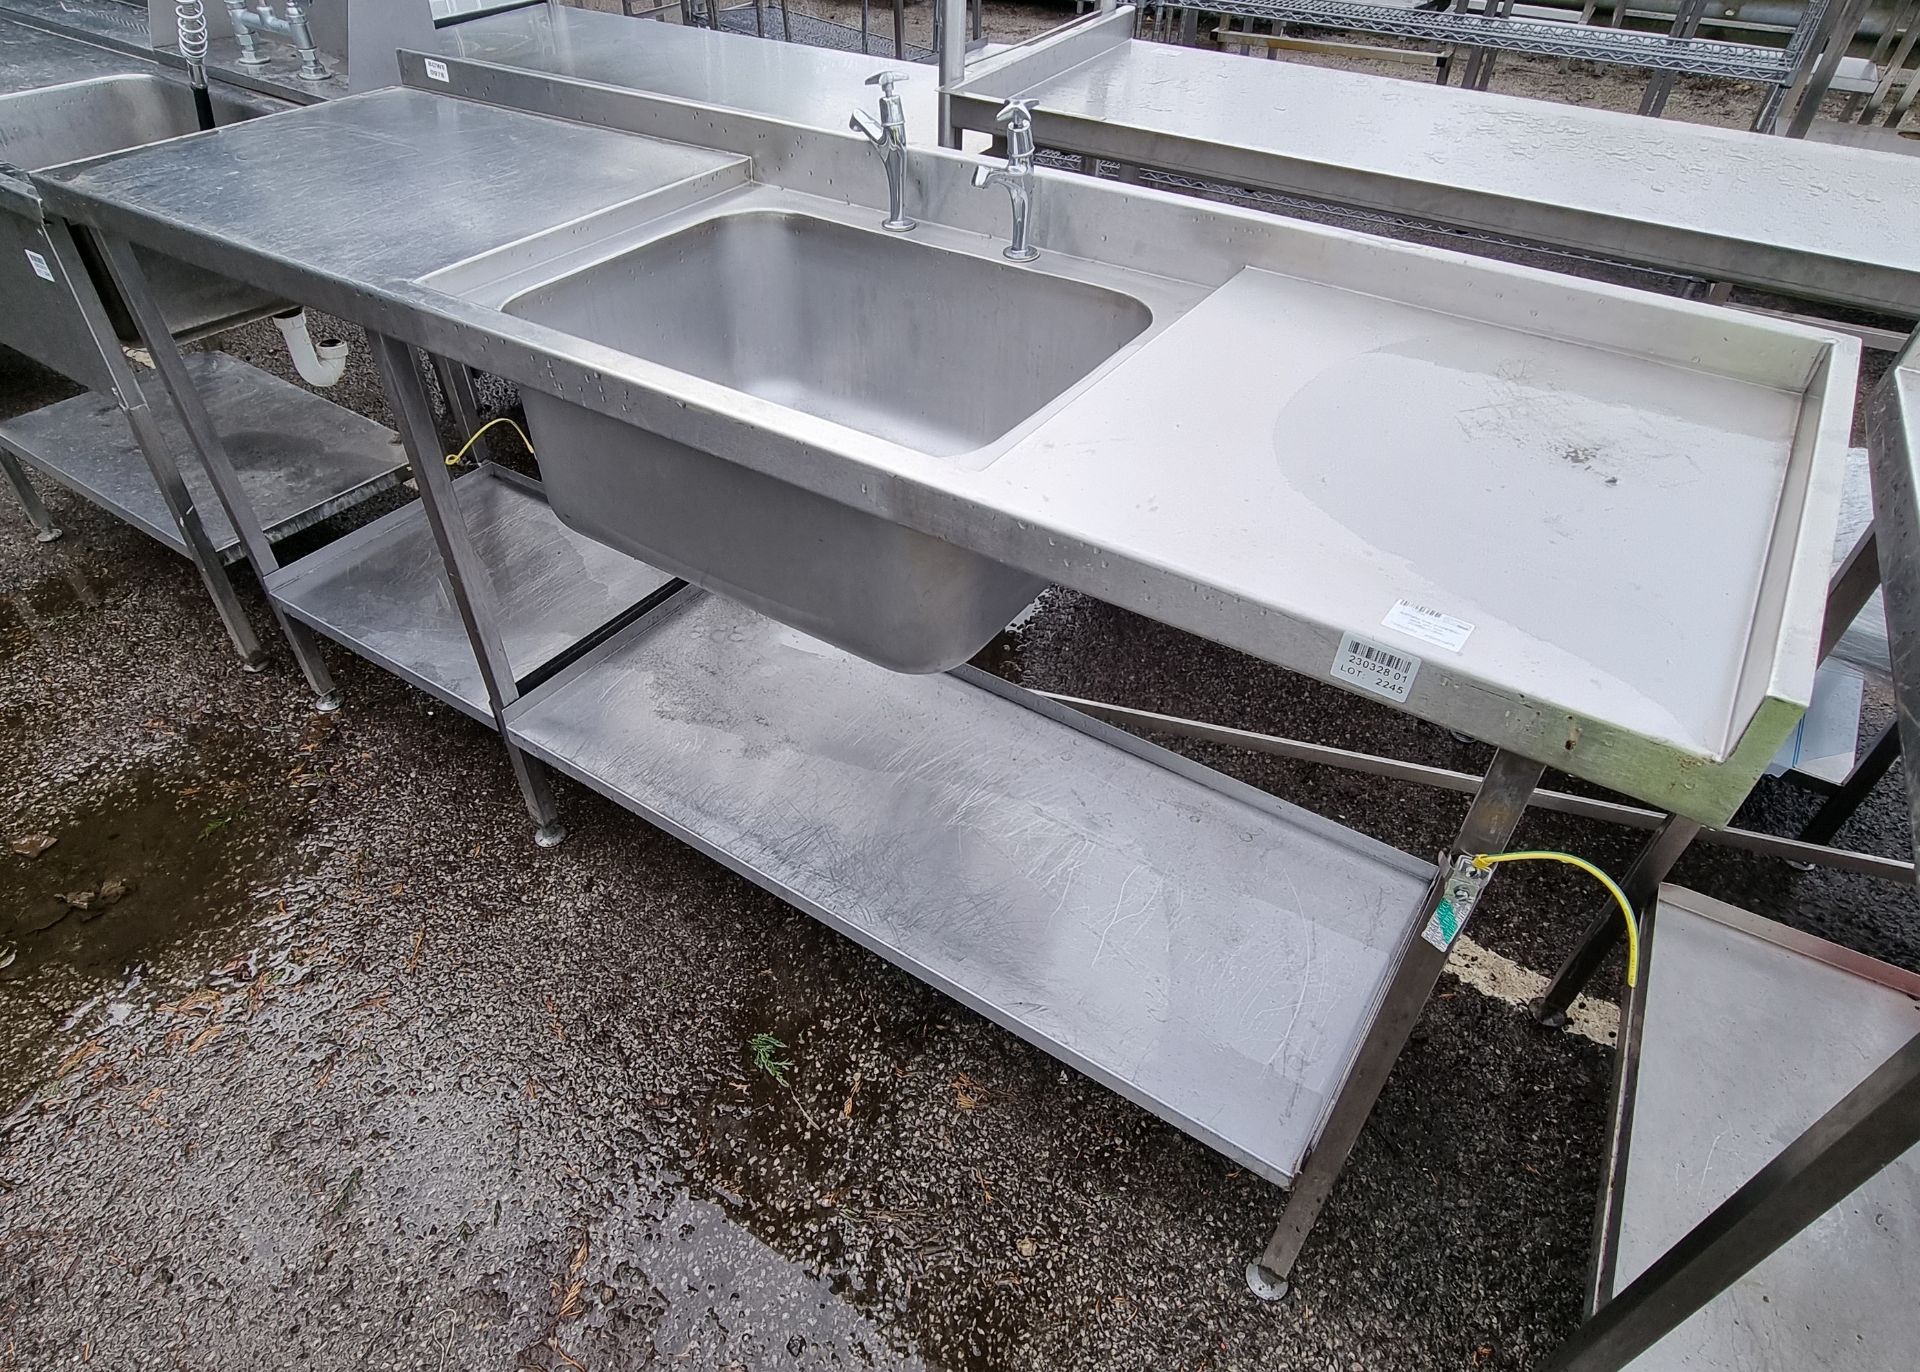 Stainless steel preparation table with sink - 203 x 62 x 108cm